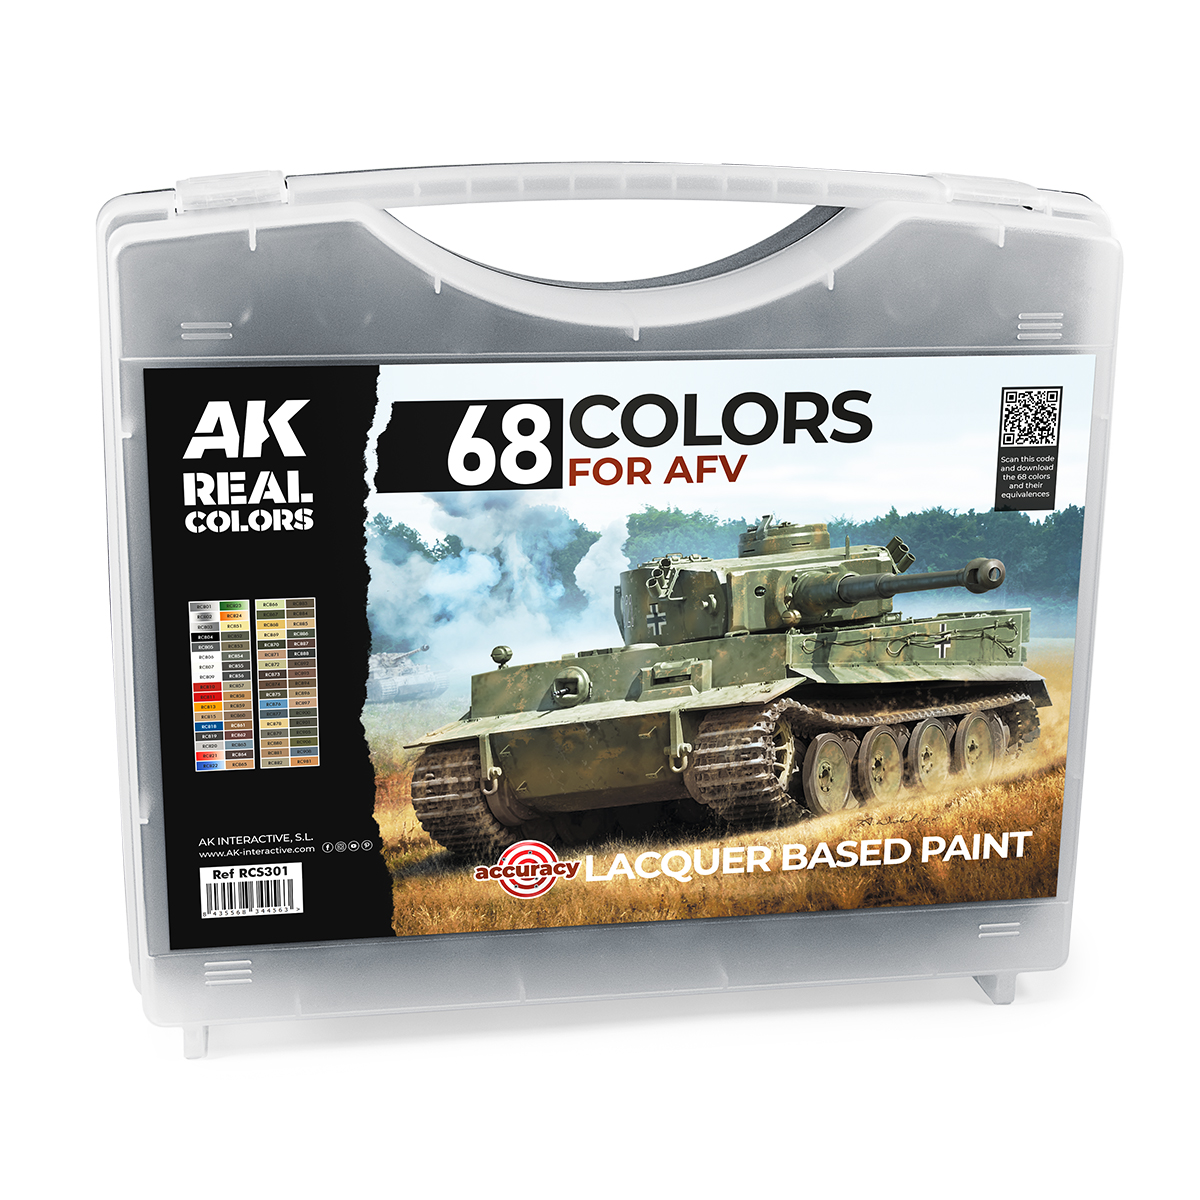 68 REAL COLORS FOR AFV